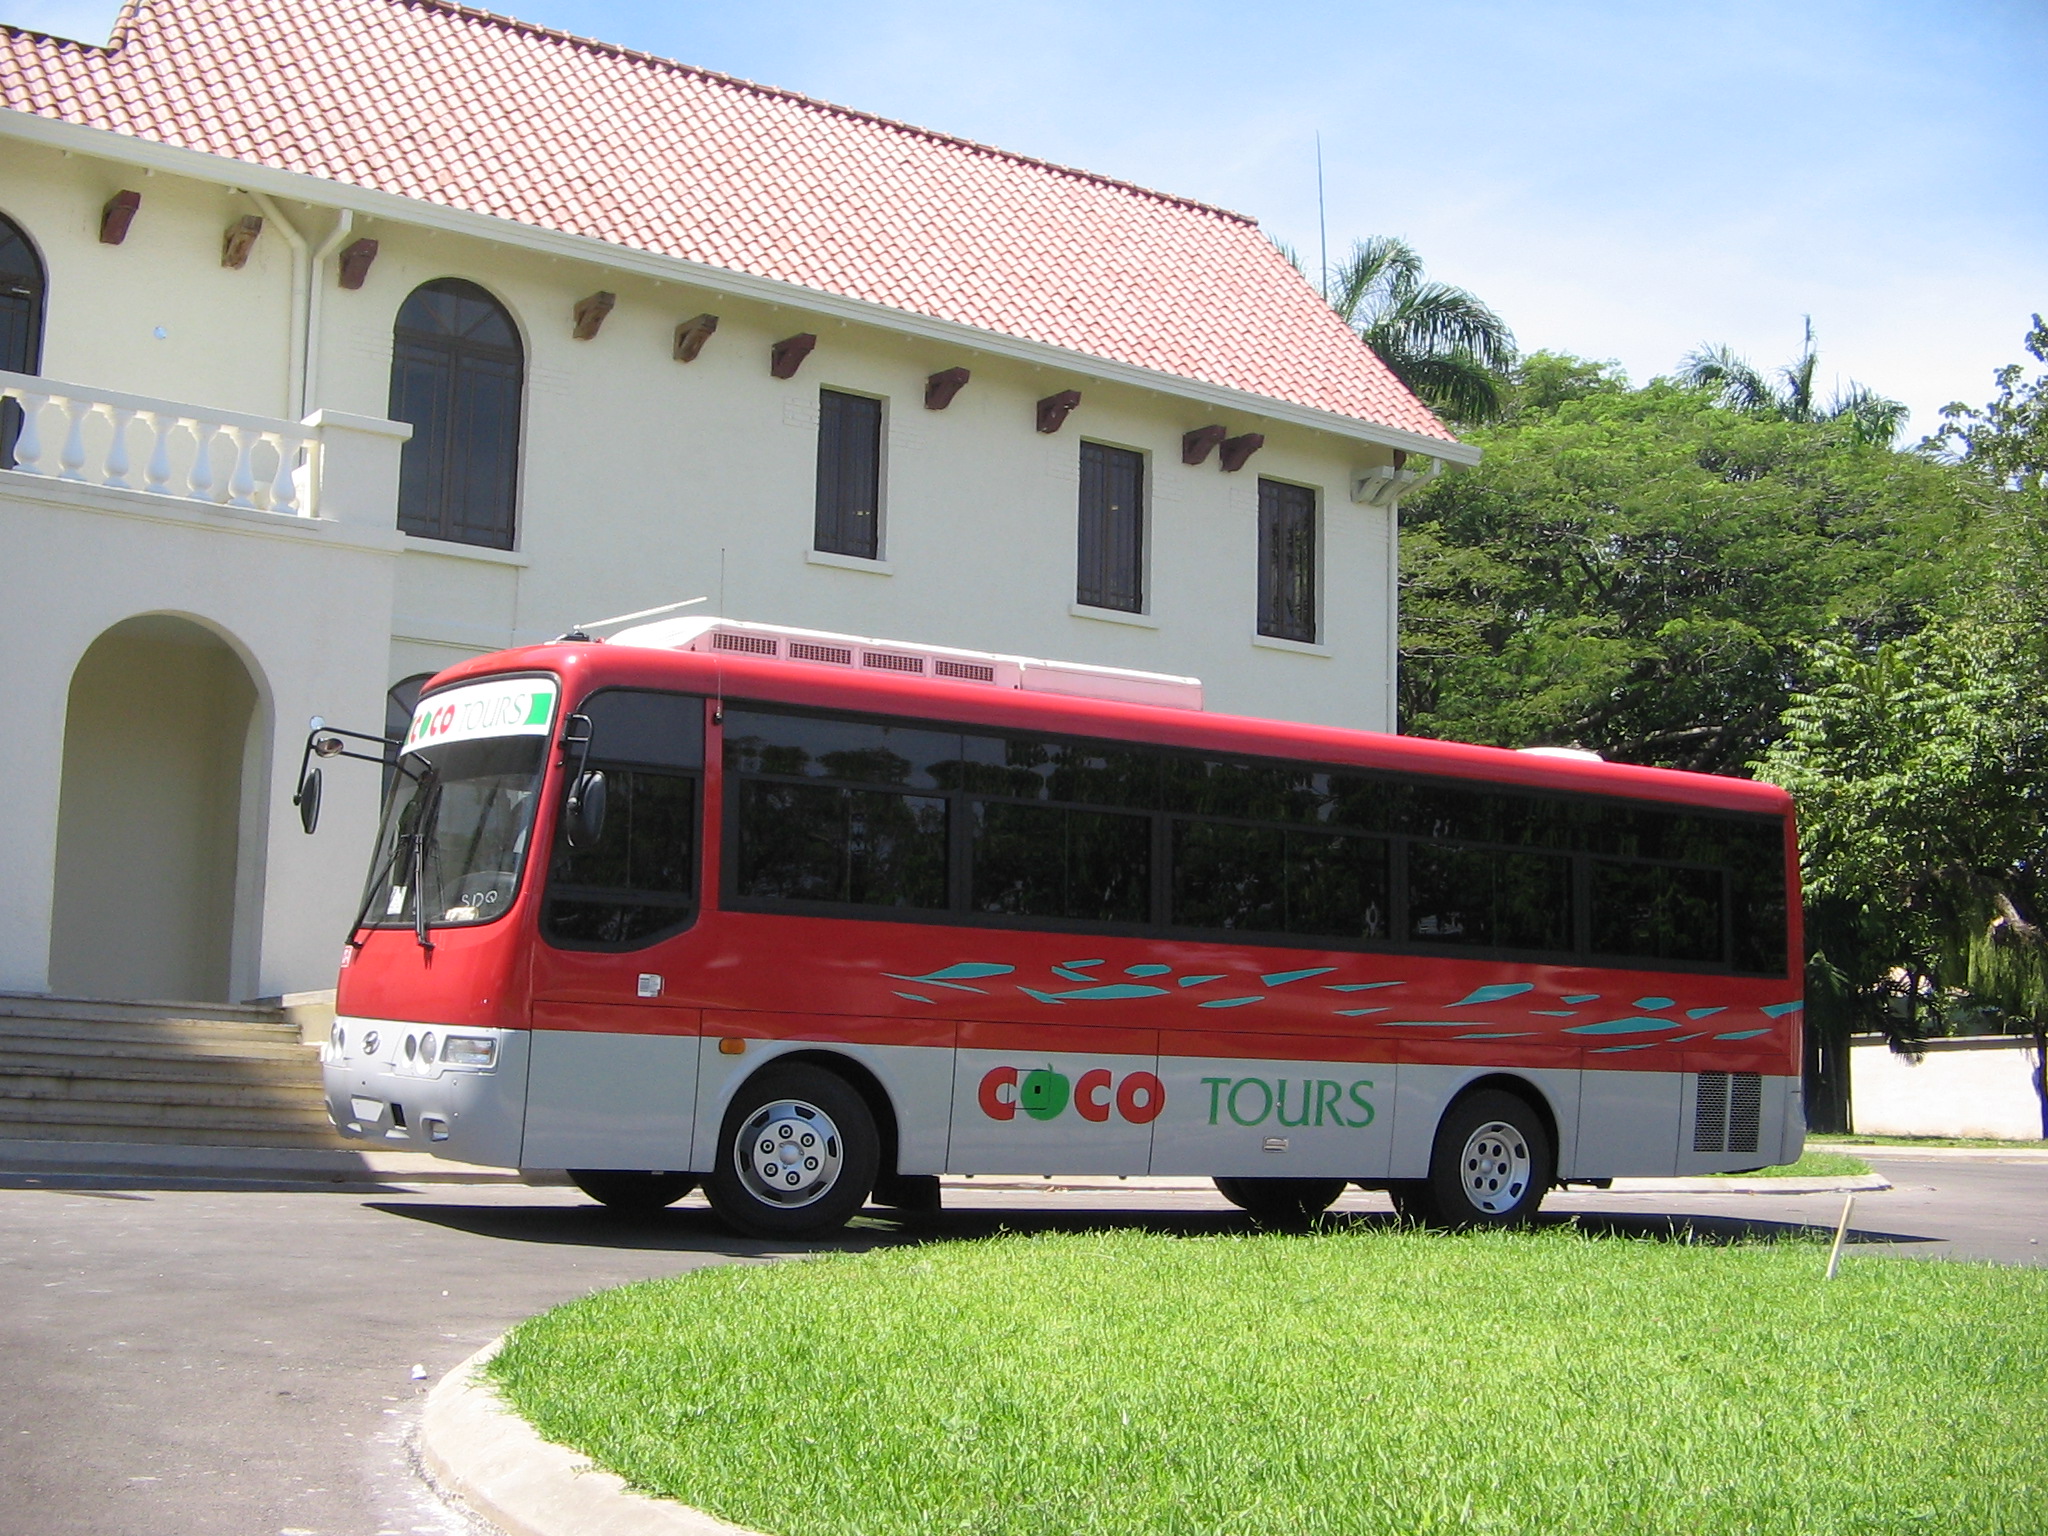 Larger Cocotours bus used on the route from La Romana to Samana